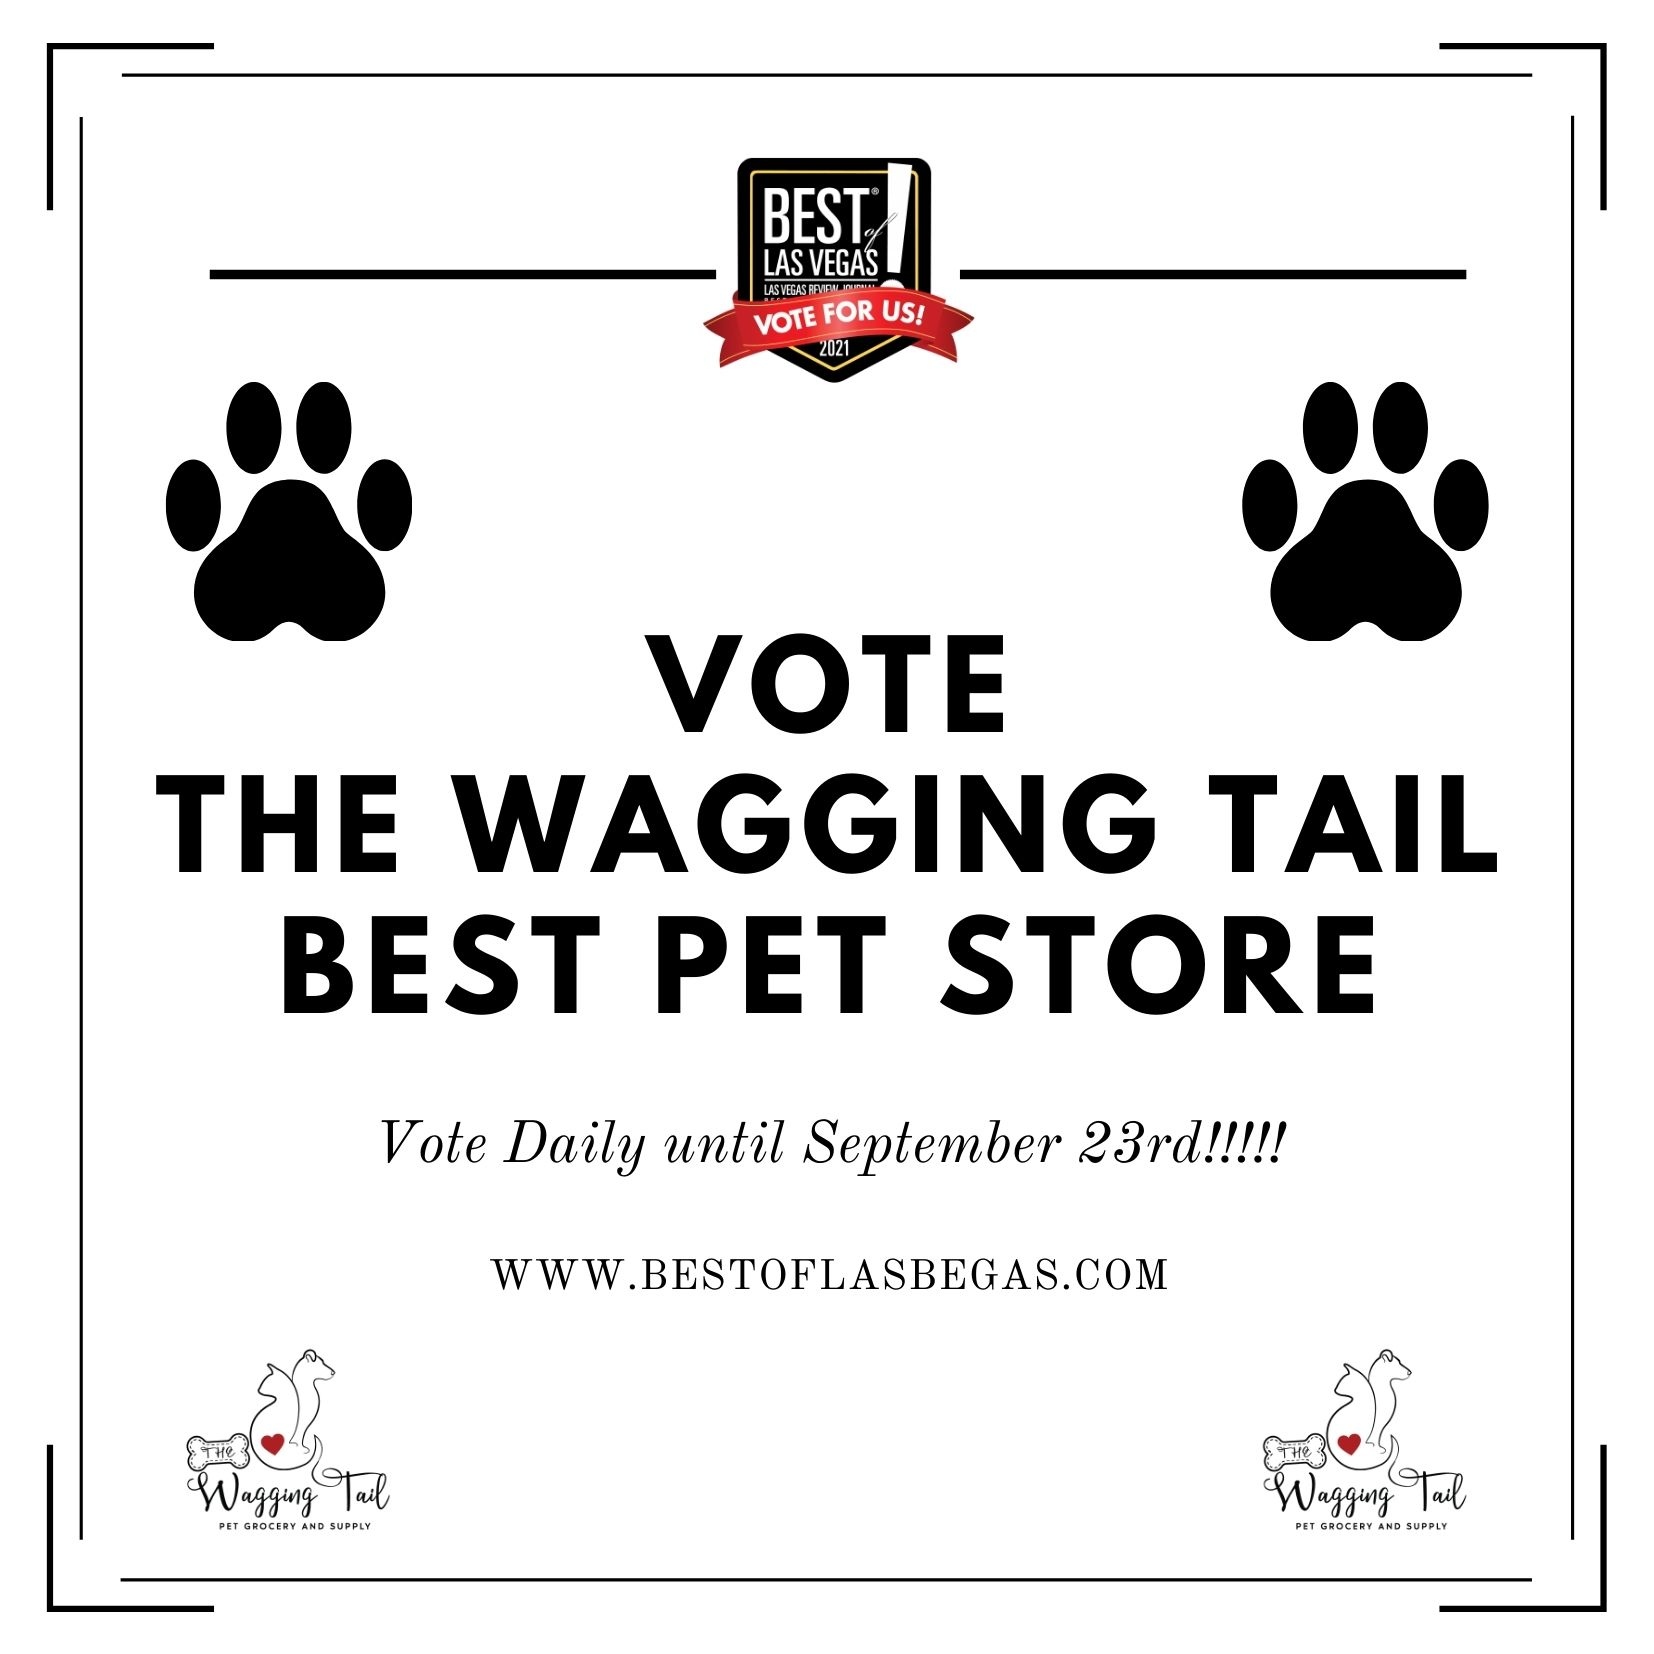 The Wagging Tail Pet Grocery & Supplies